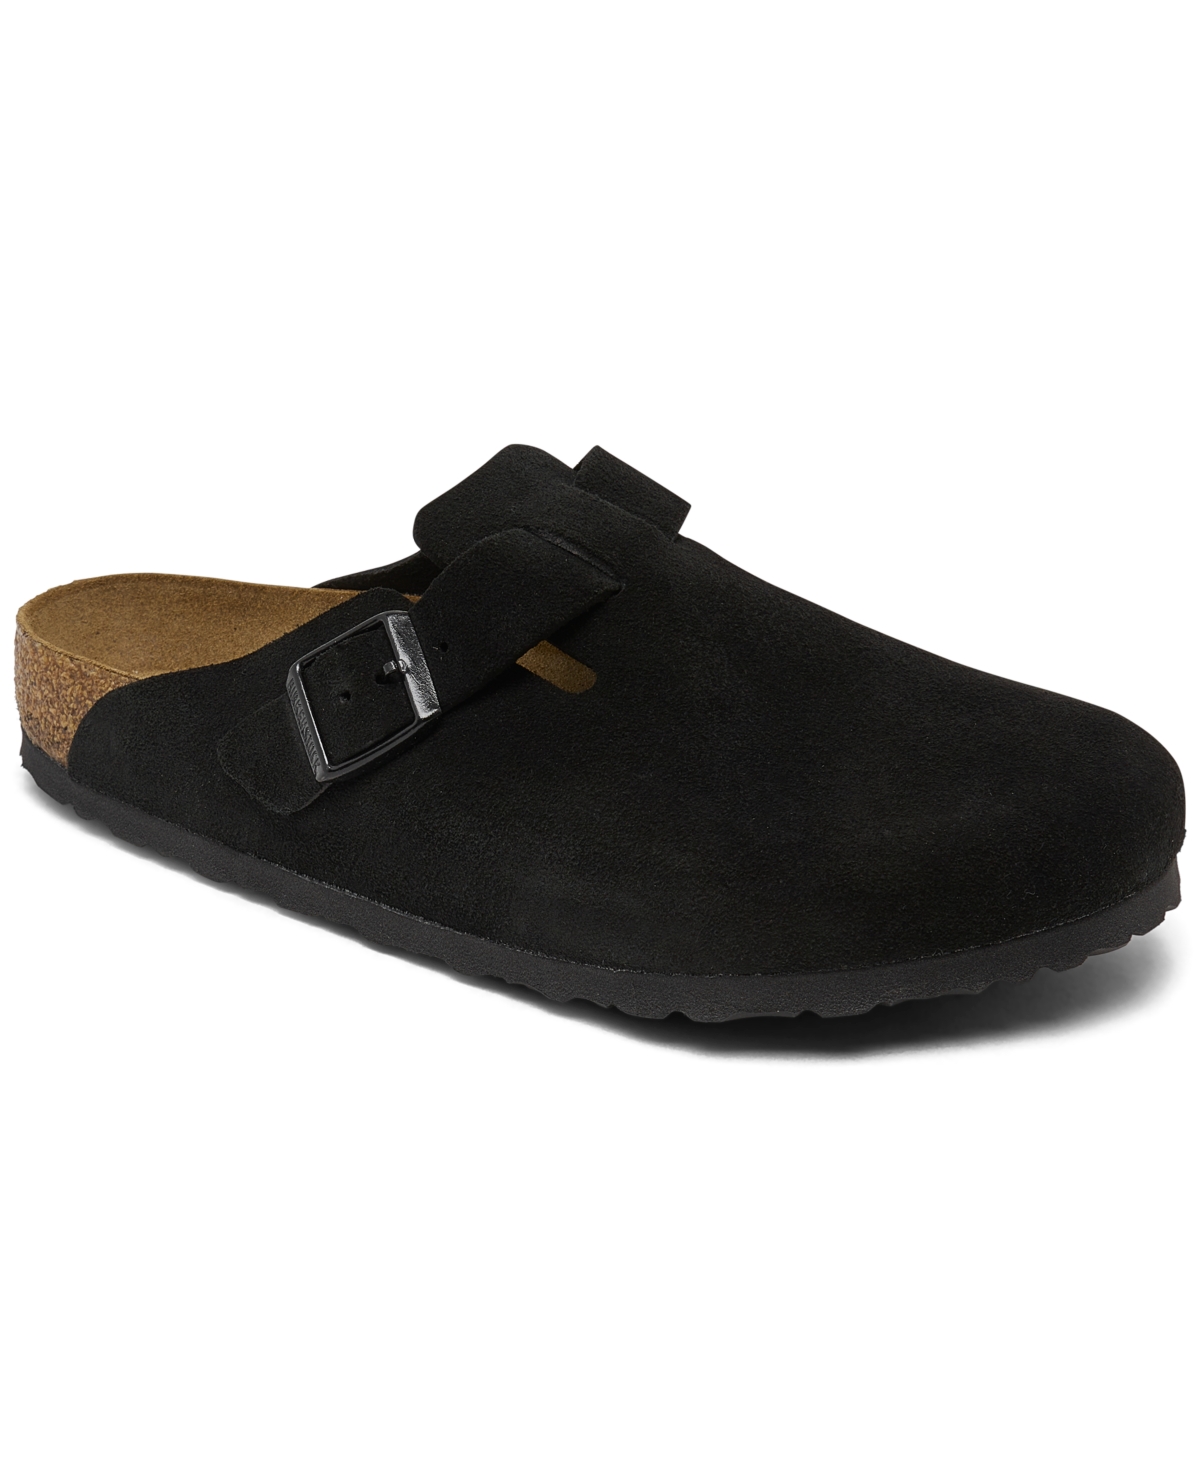 Men's Boston Soft Footbed Suede Leather Clogs from Finish Line - Black